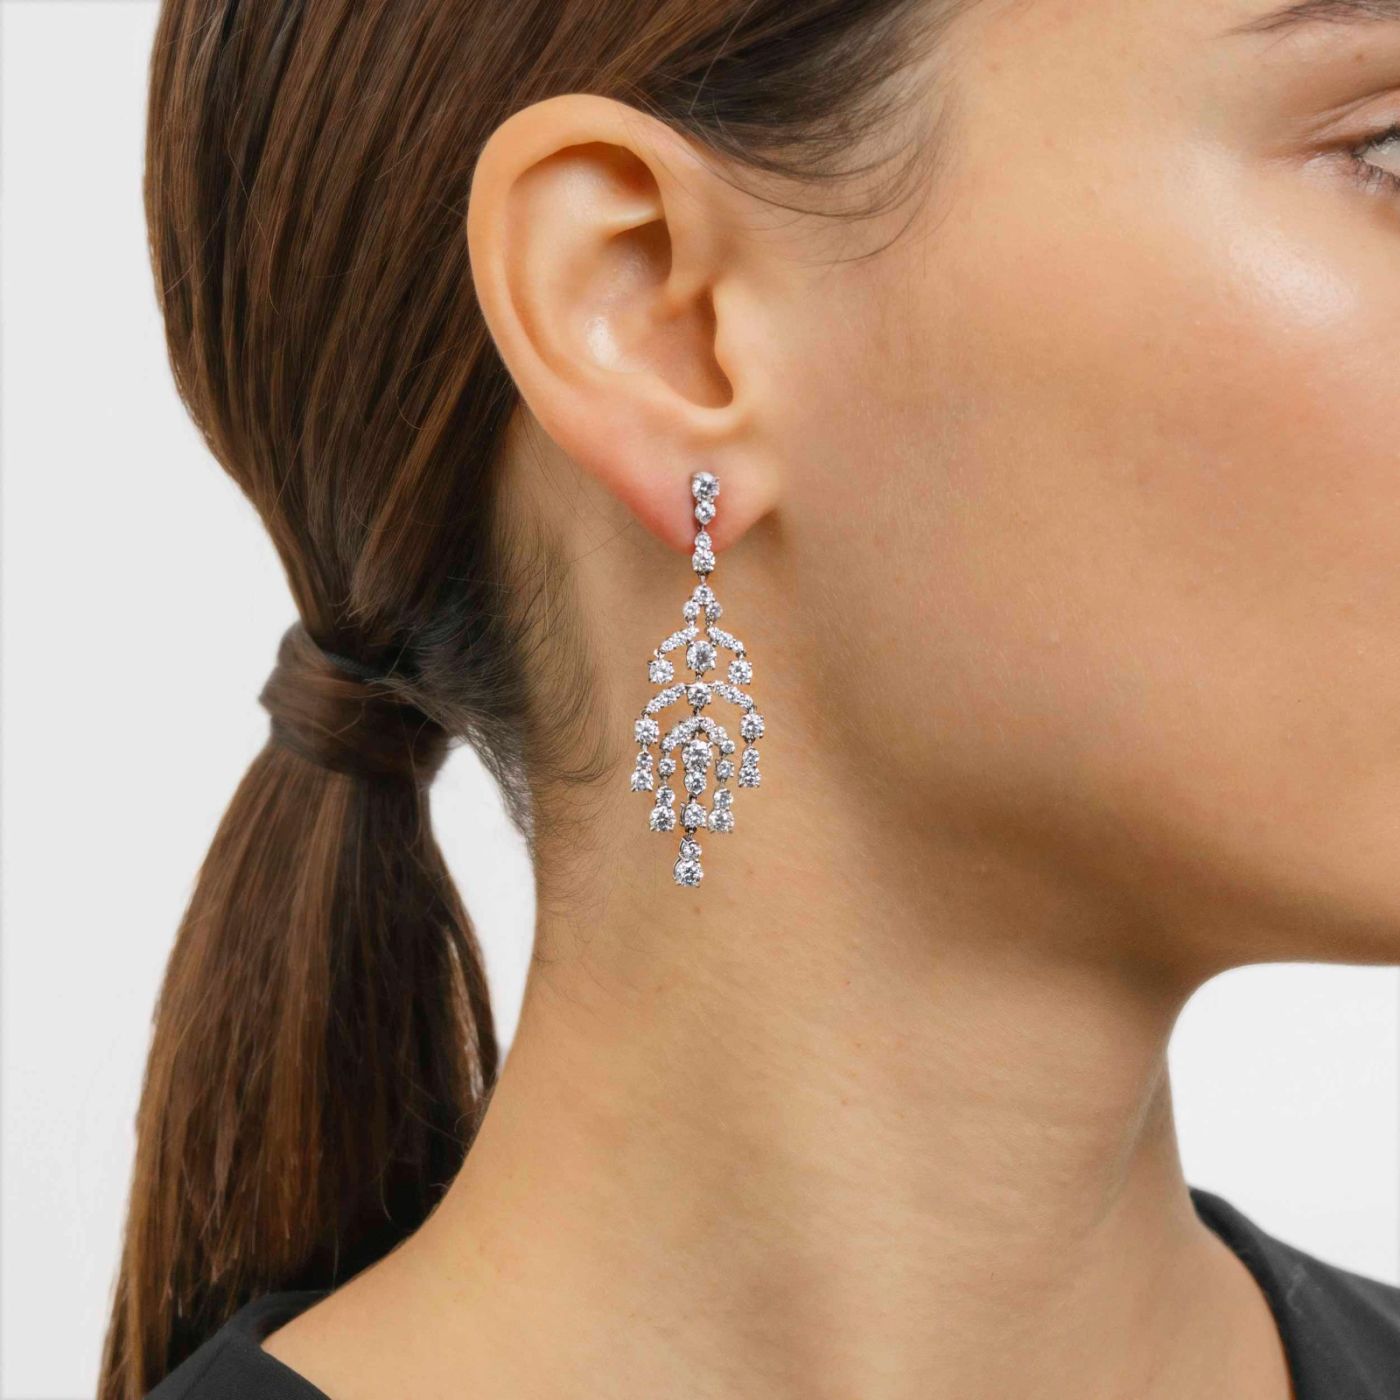 Long earrings in white gold waterfall with diamonds